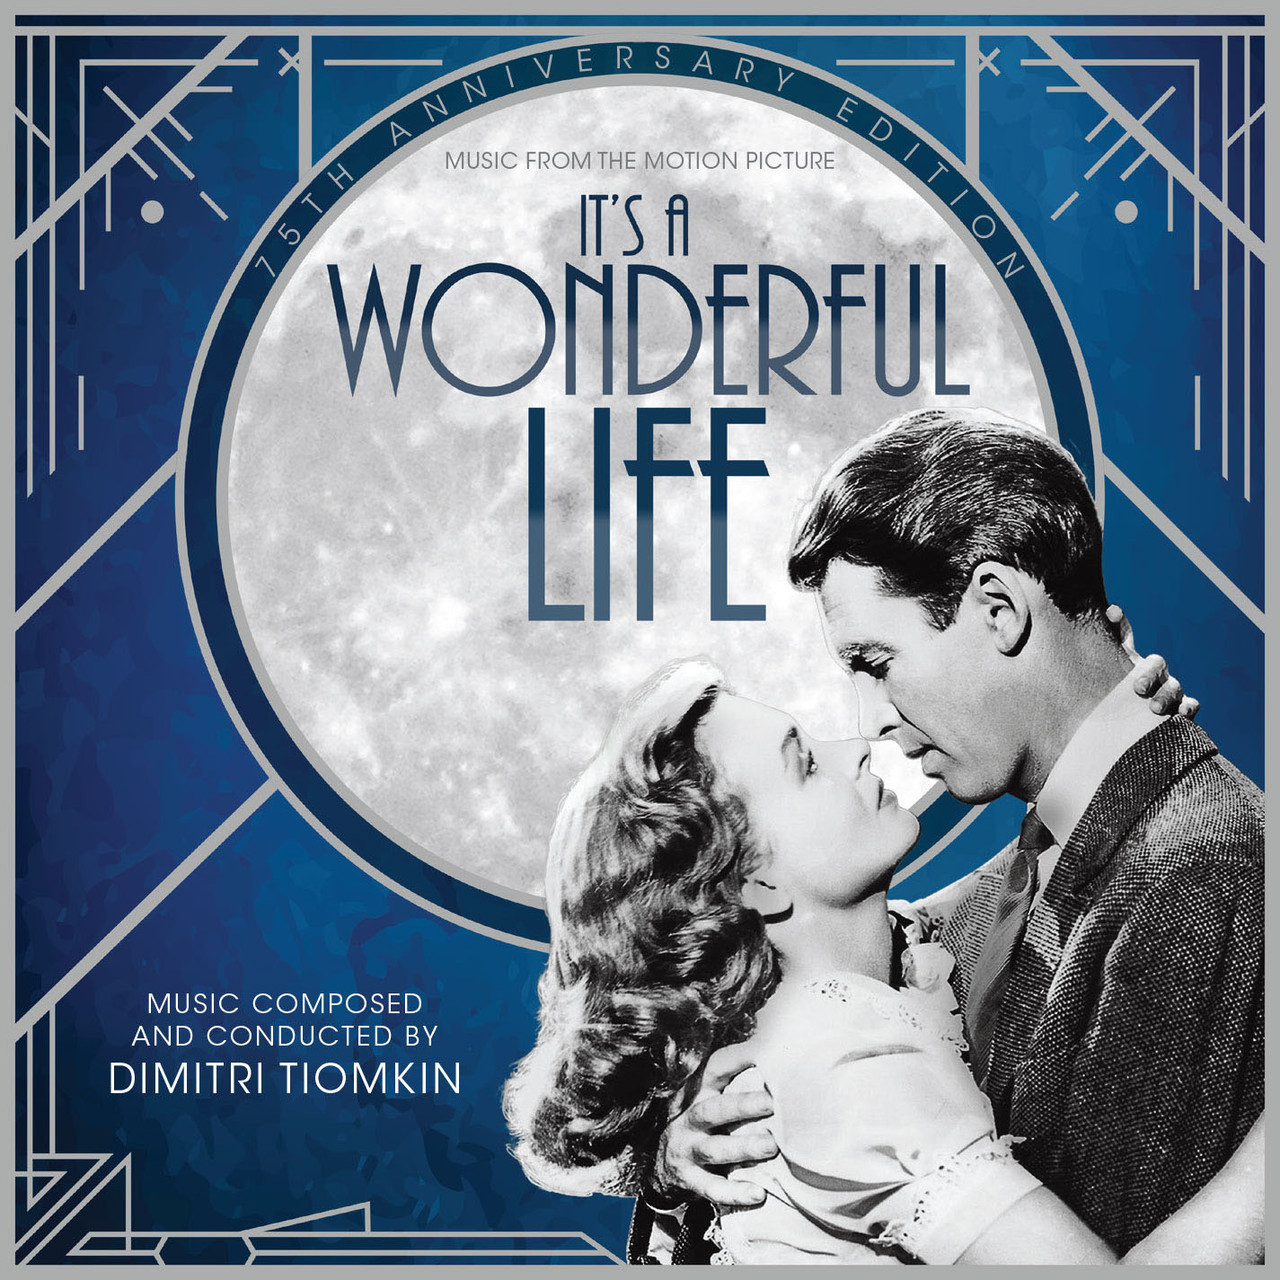 IT’S A WONDERFUL LIFE: 75th ANNIVERSARY REMASTERED LIMITED EDITION